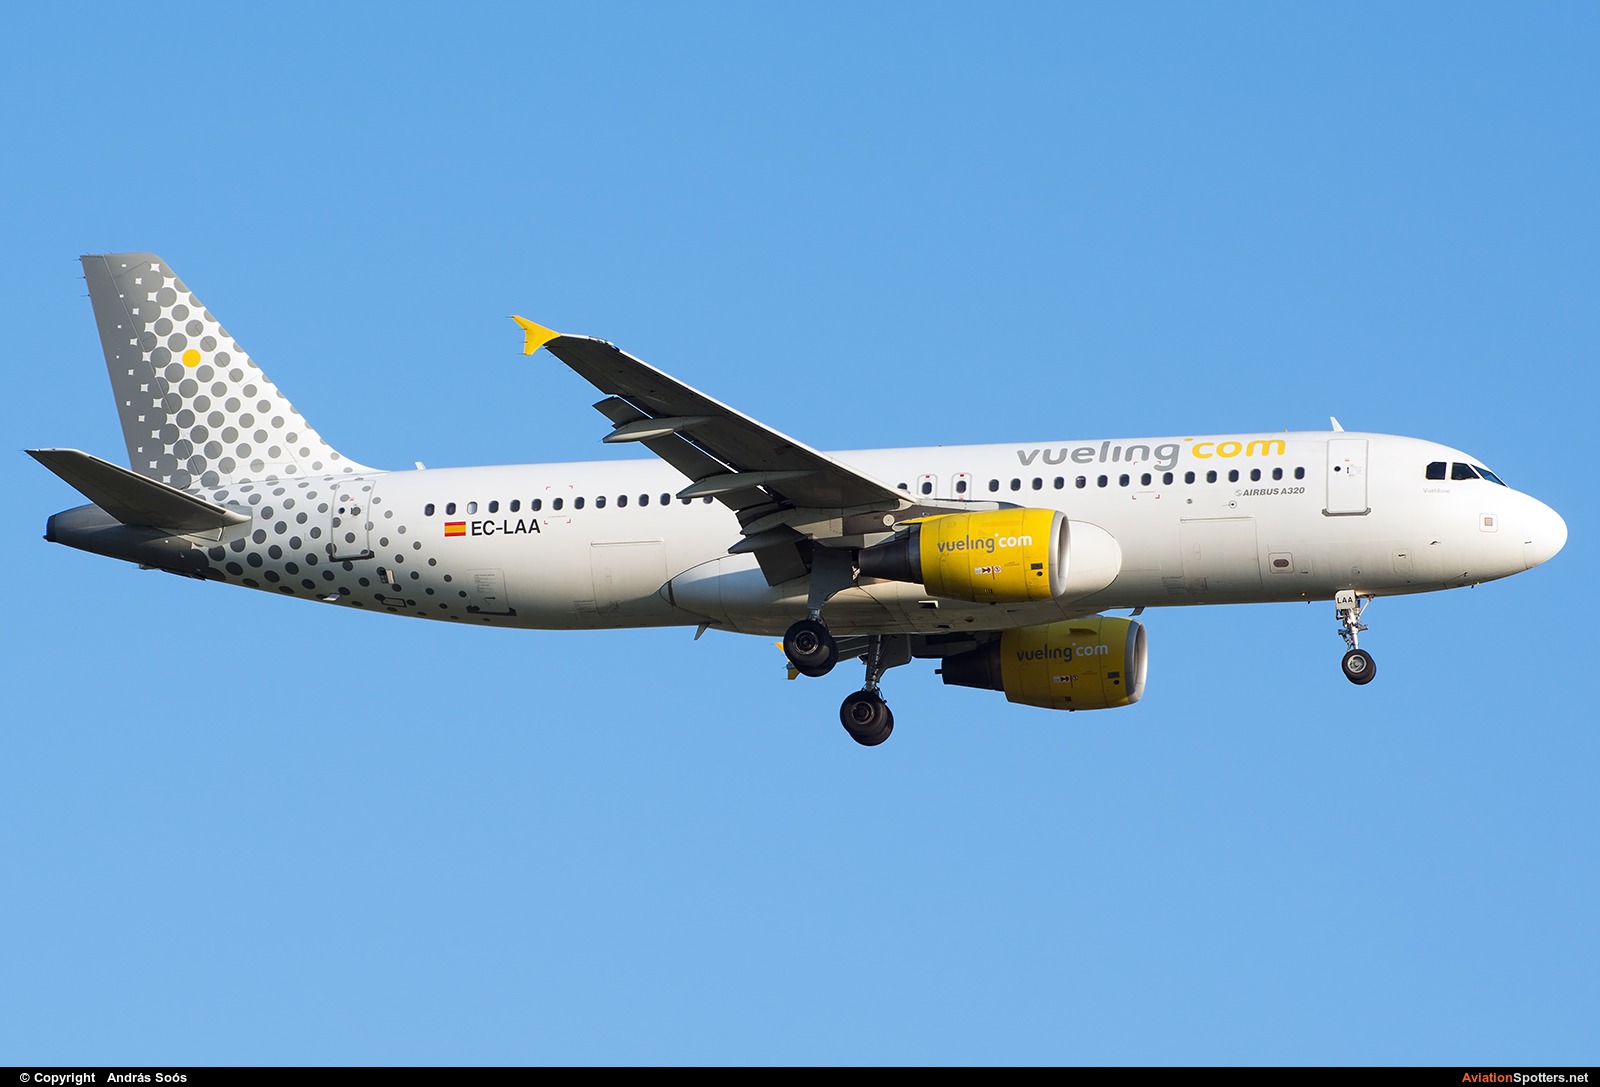 Vueling Airlines  -  A320  (EC-LAA) By András Soós (sas1965)